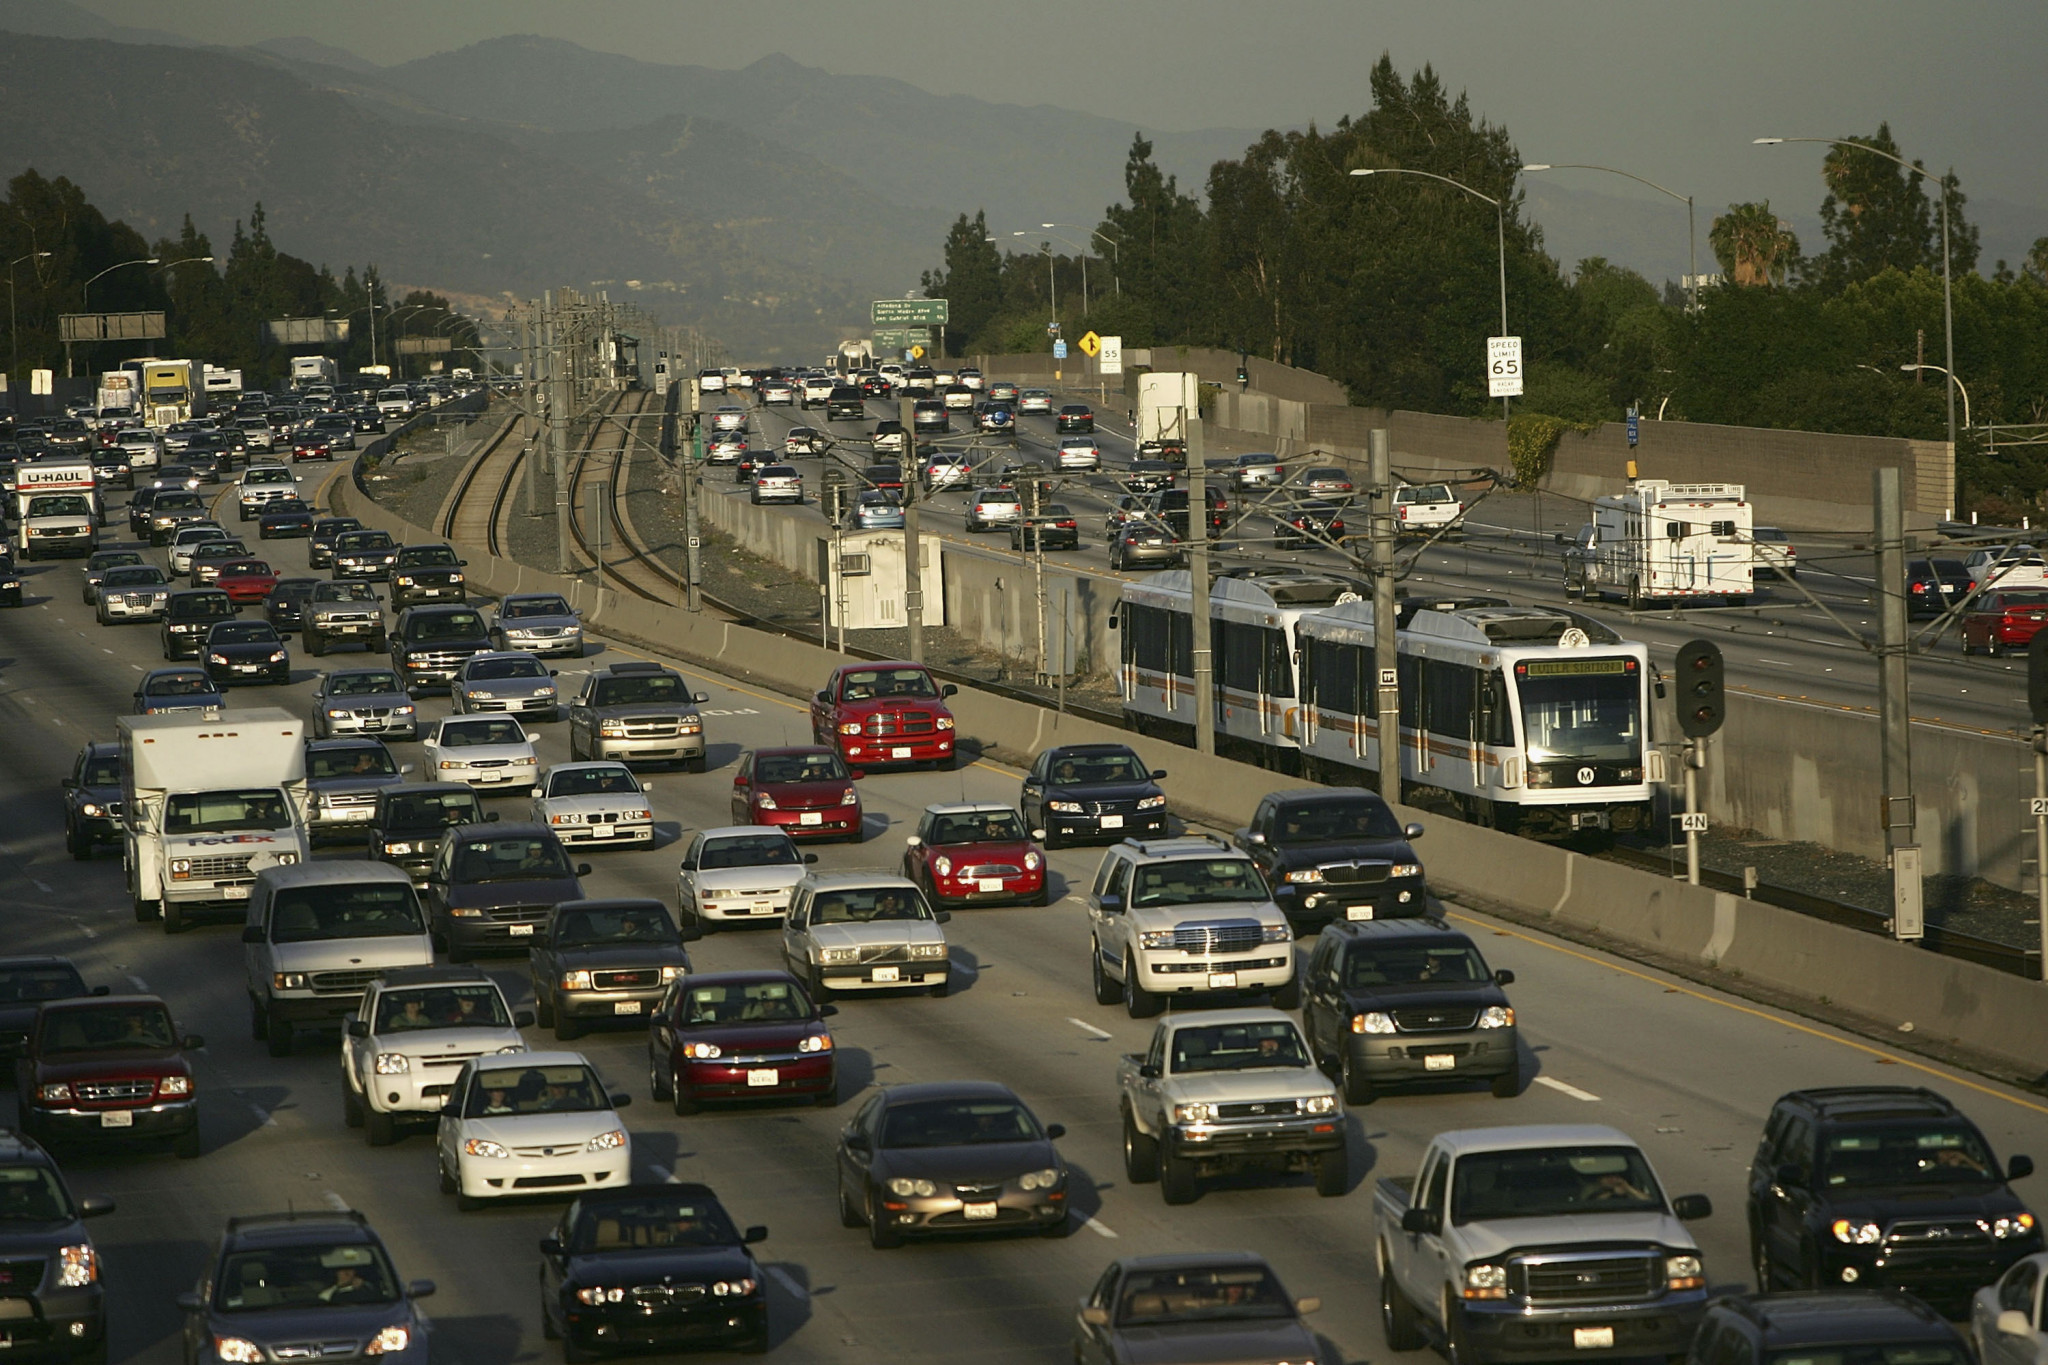 Public transport in Los Angeles is receiving huge investment prior to the 2028 Olympic and Paralympic Games - and Laura Rubio-Cornejo, newly appointed LA transportation manager, will have a key role to play in the planning ©Getty Images